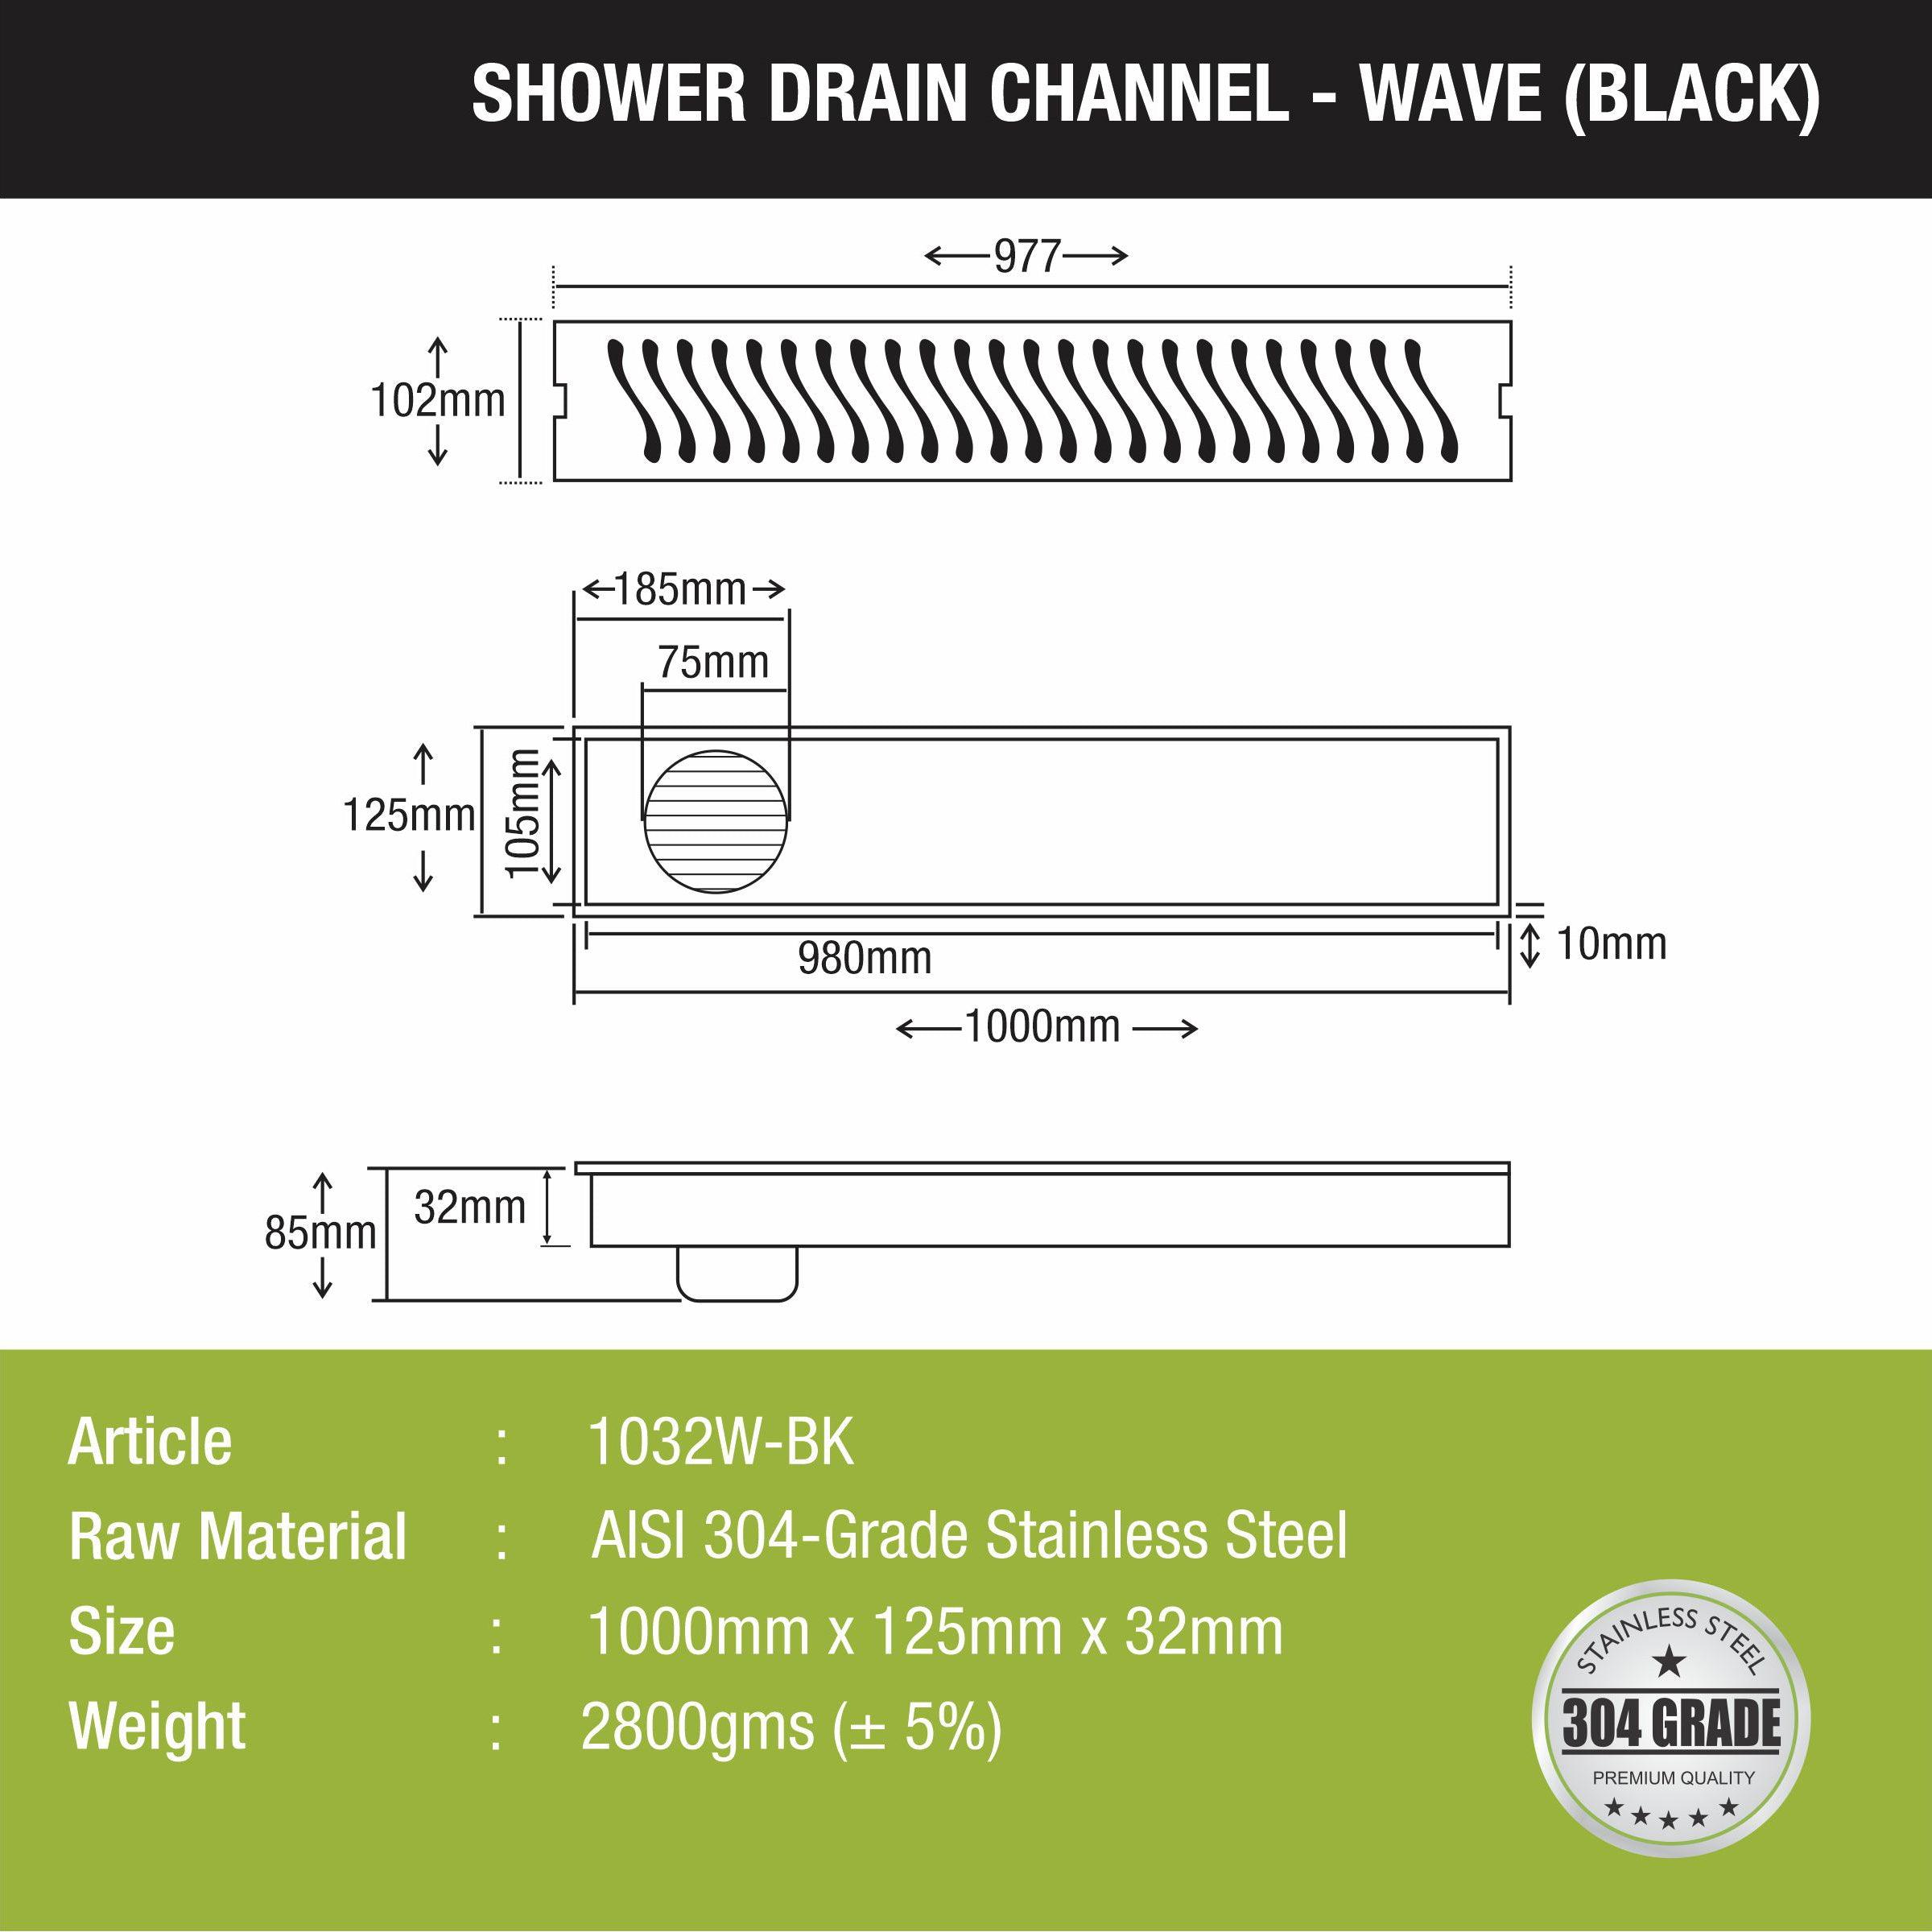 Wave Shower Drain Channel - Black (40 x 5 Inches) size and measurement